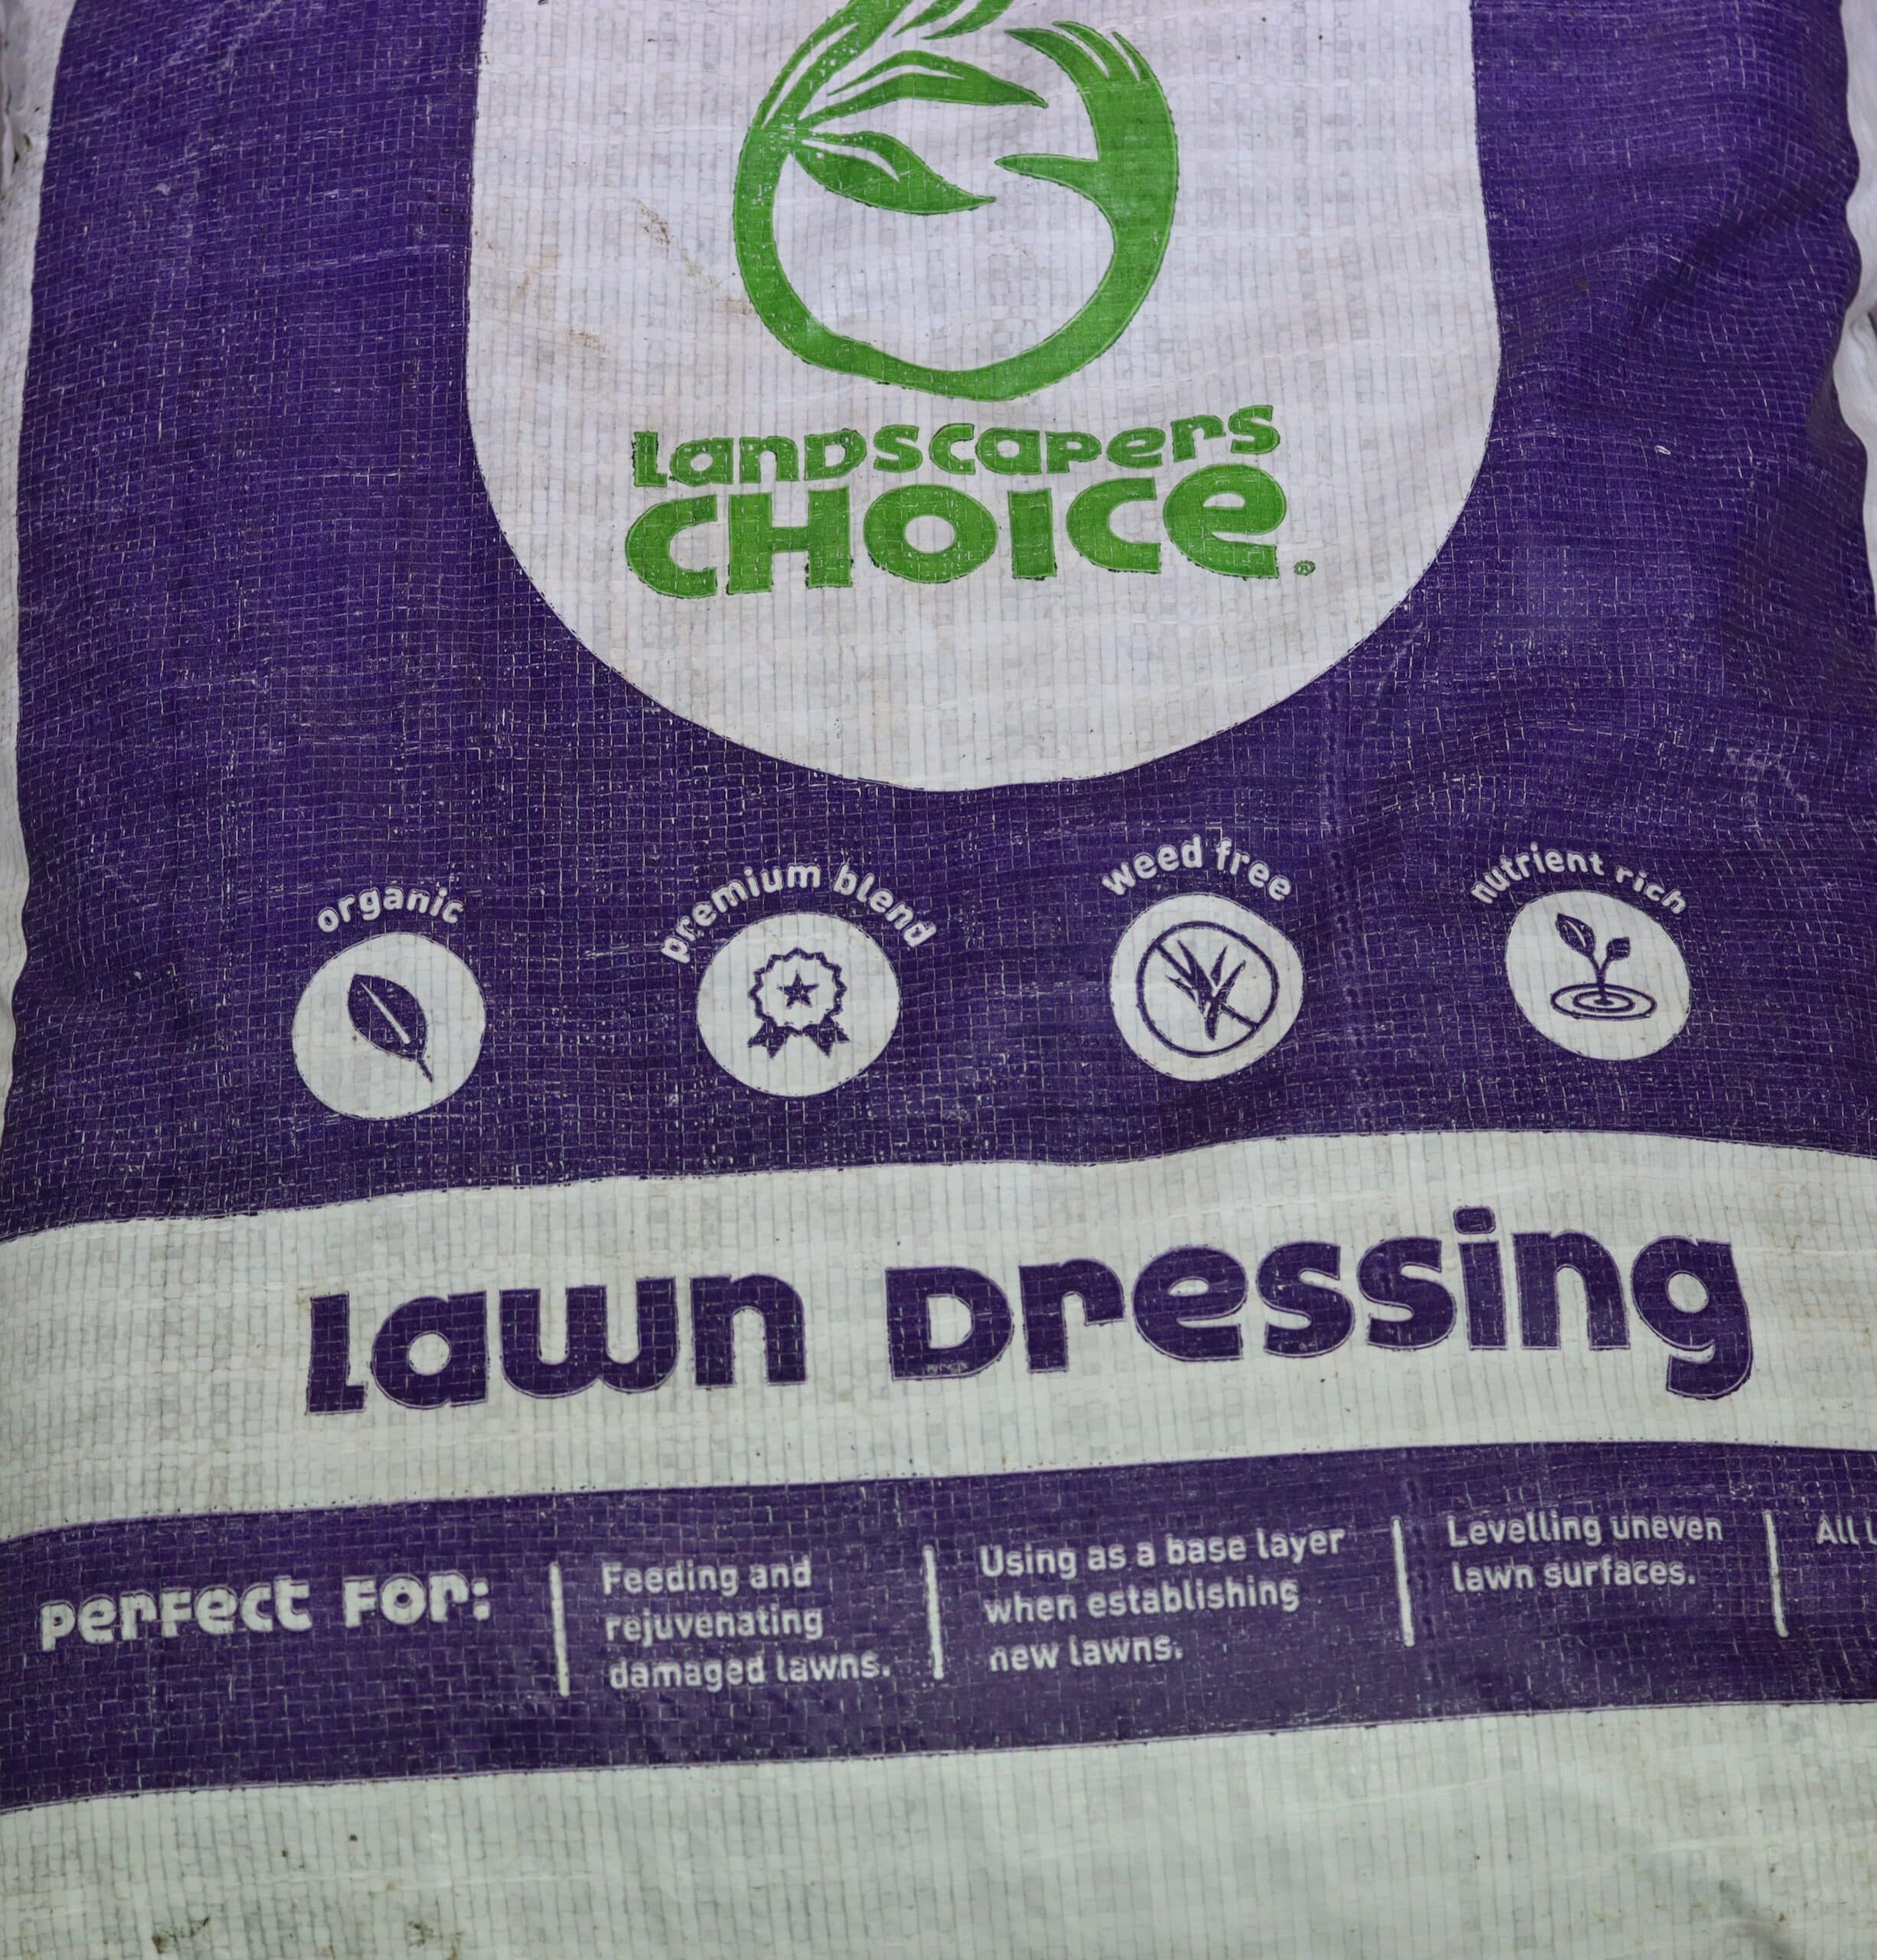 A purple and white bag of Landscapers Choice lawn dressing.